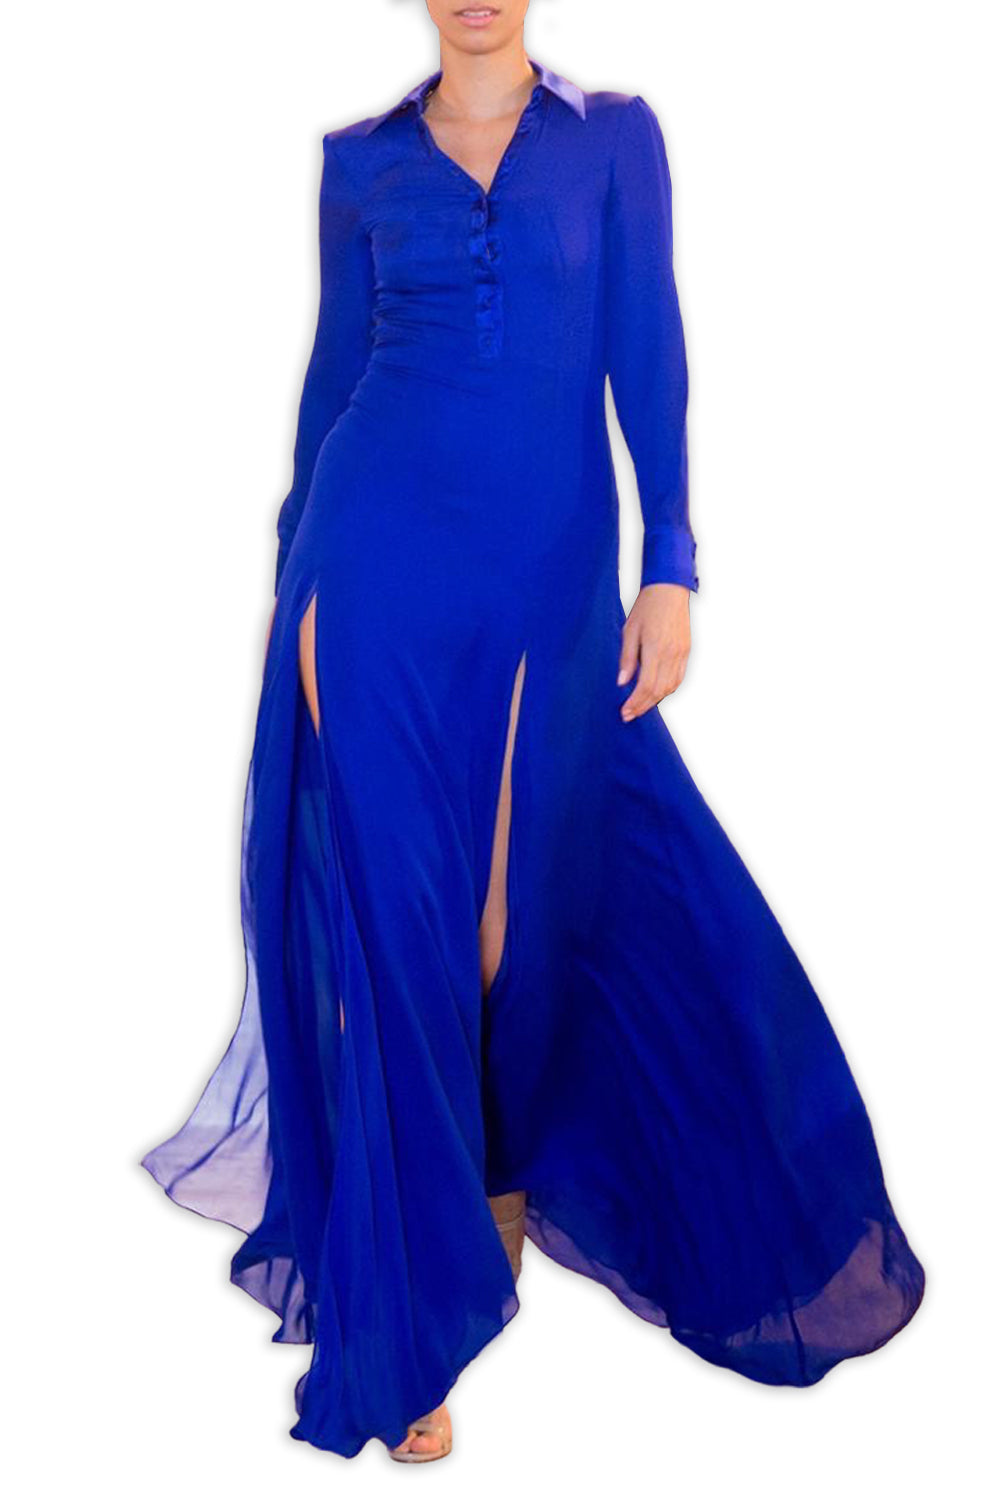 The Deep V Shirt Gown